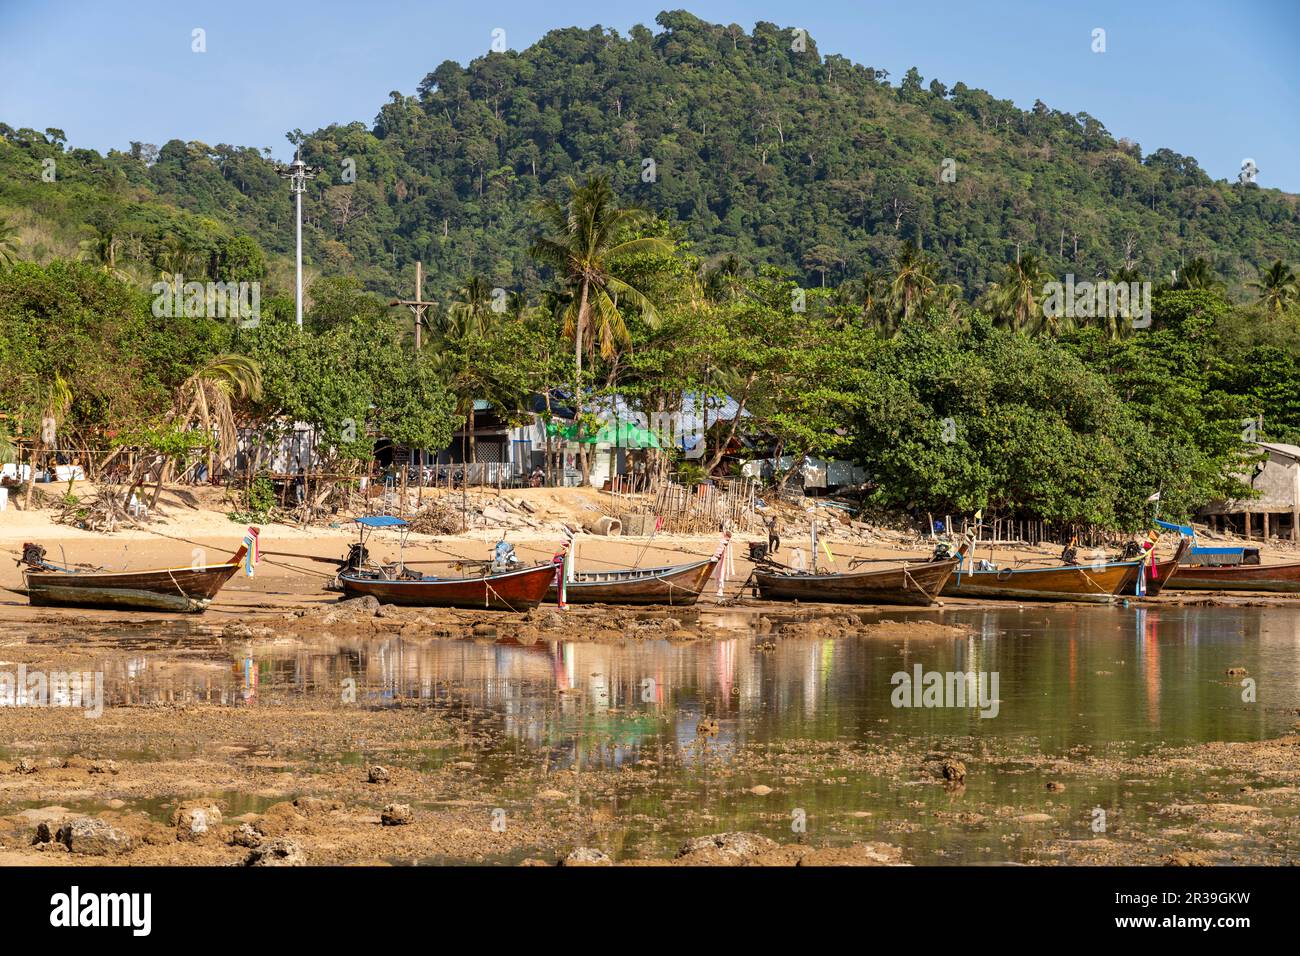 Fischerboote bei Ebbe, Insel Koh Libong in der Andamanensee, Thailand, Asien   |  Fishing boats at lpw tide, Ko Libong, island in the Andaman Sea , Th Stock Photo